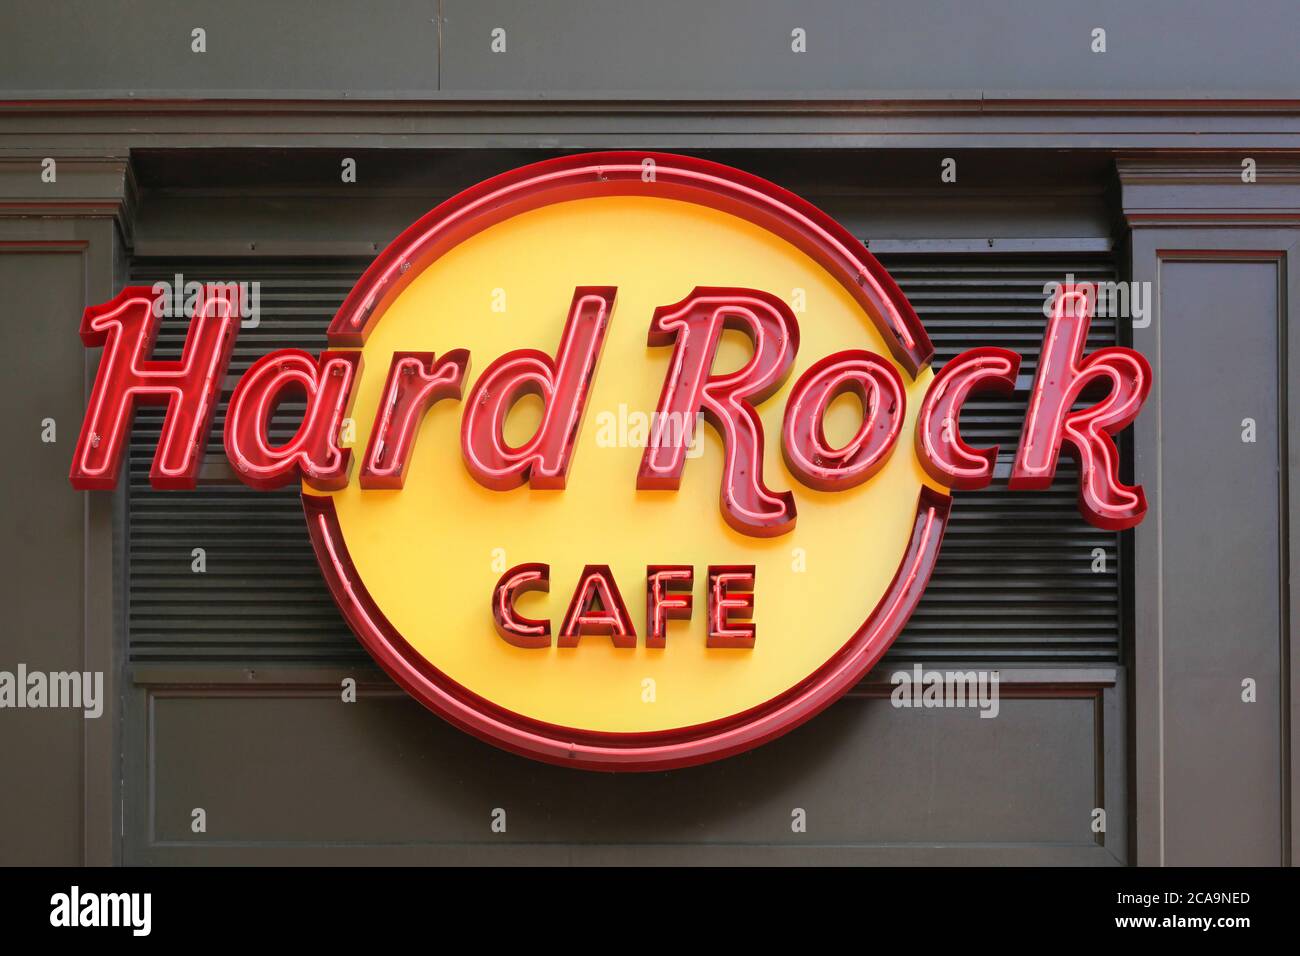 Lyon, France - September 5, 2019: Hard rock cafe logo on a wall in Lyon. Hard Rock Cafe Inc. is a chain of theme restaurants founded in 1971 Stock Photo